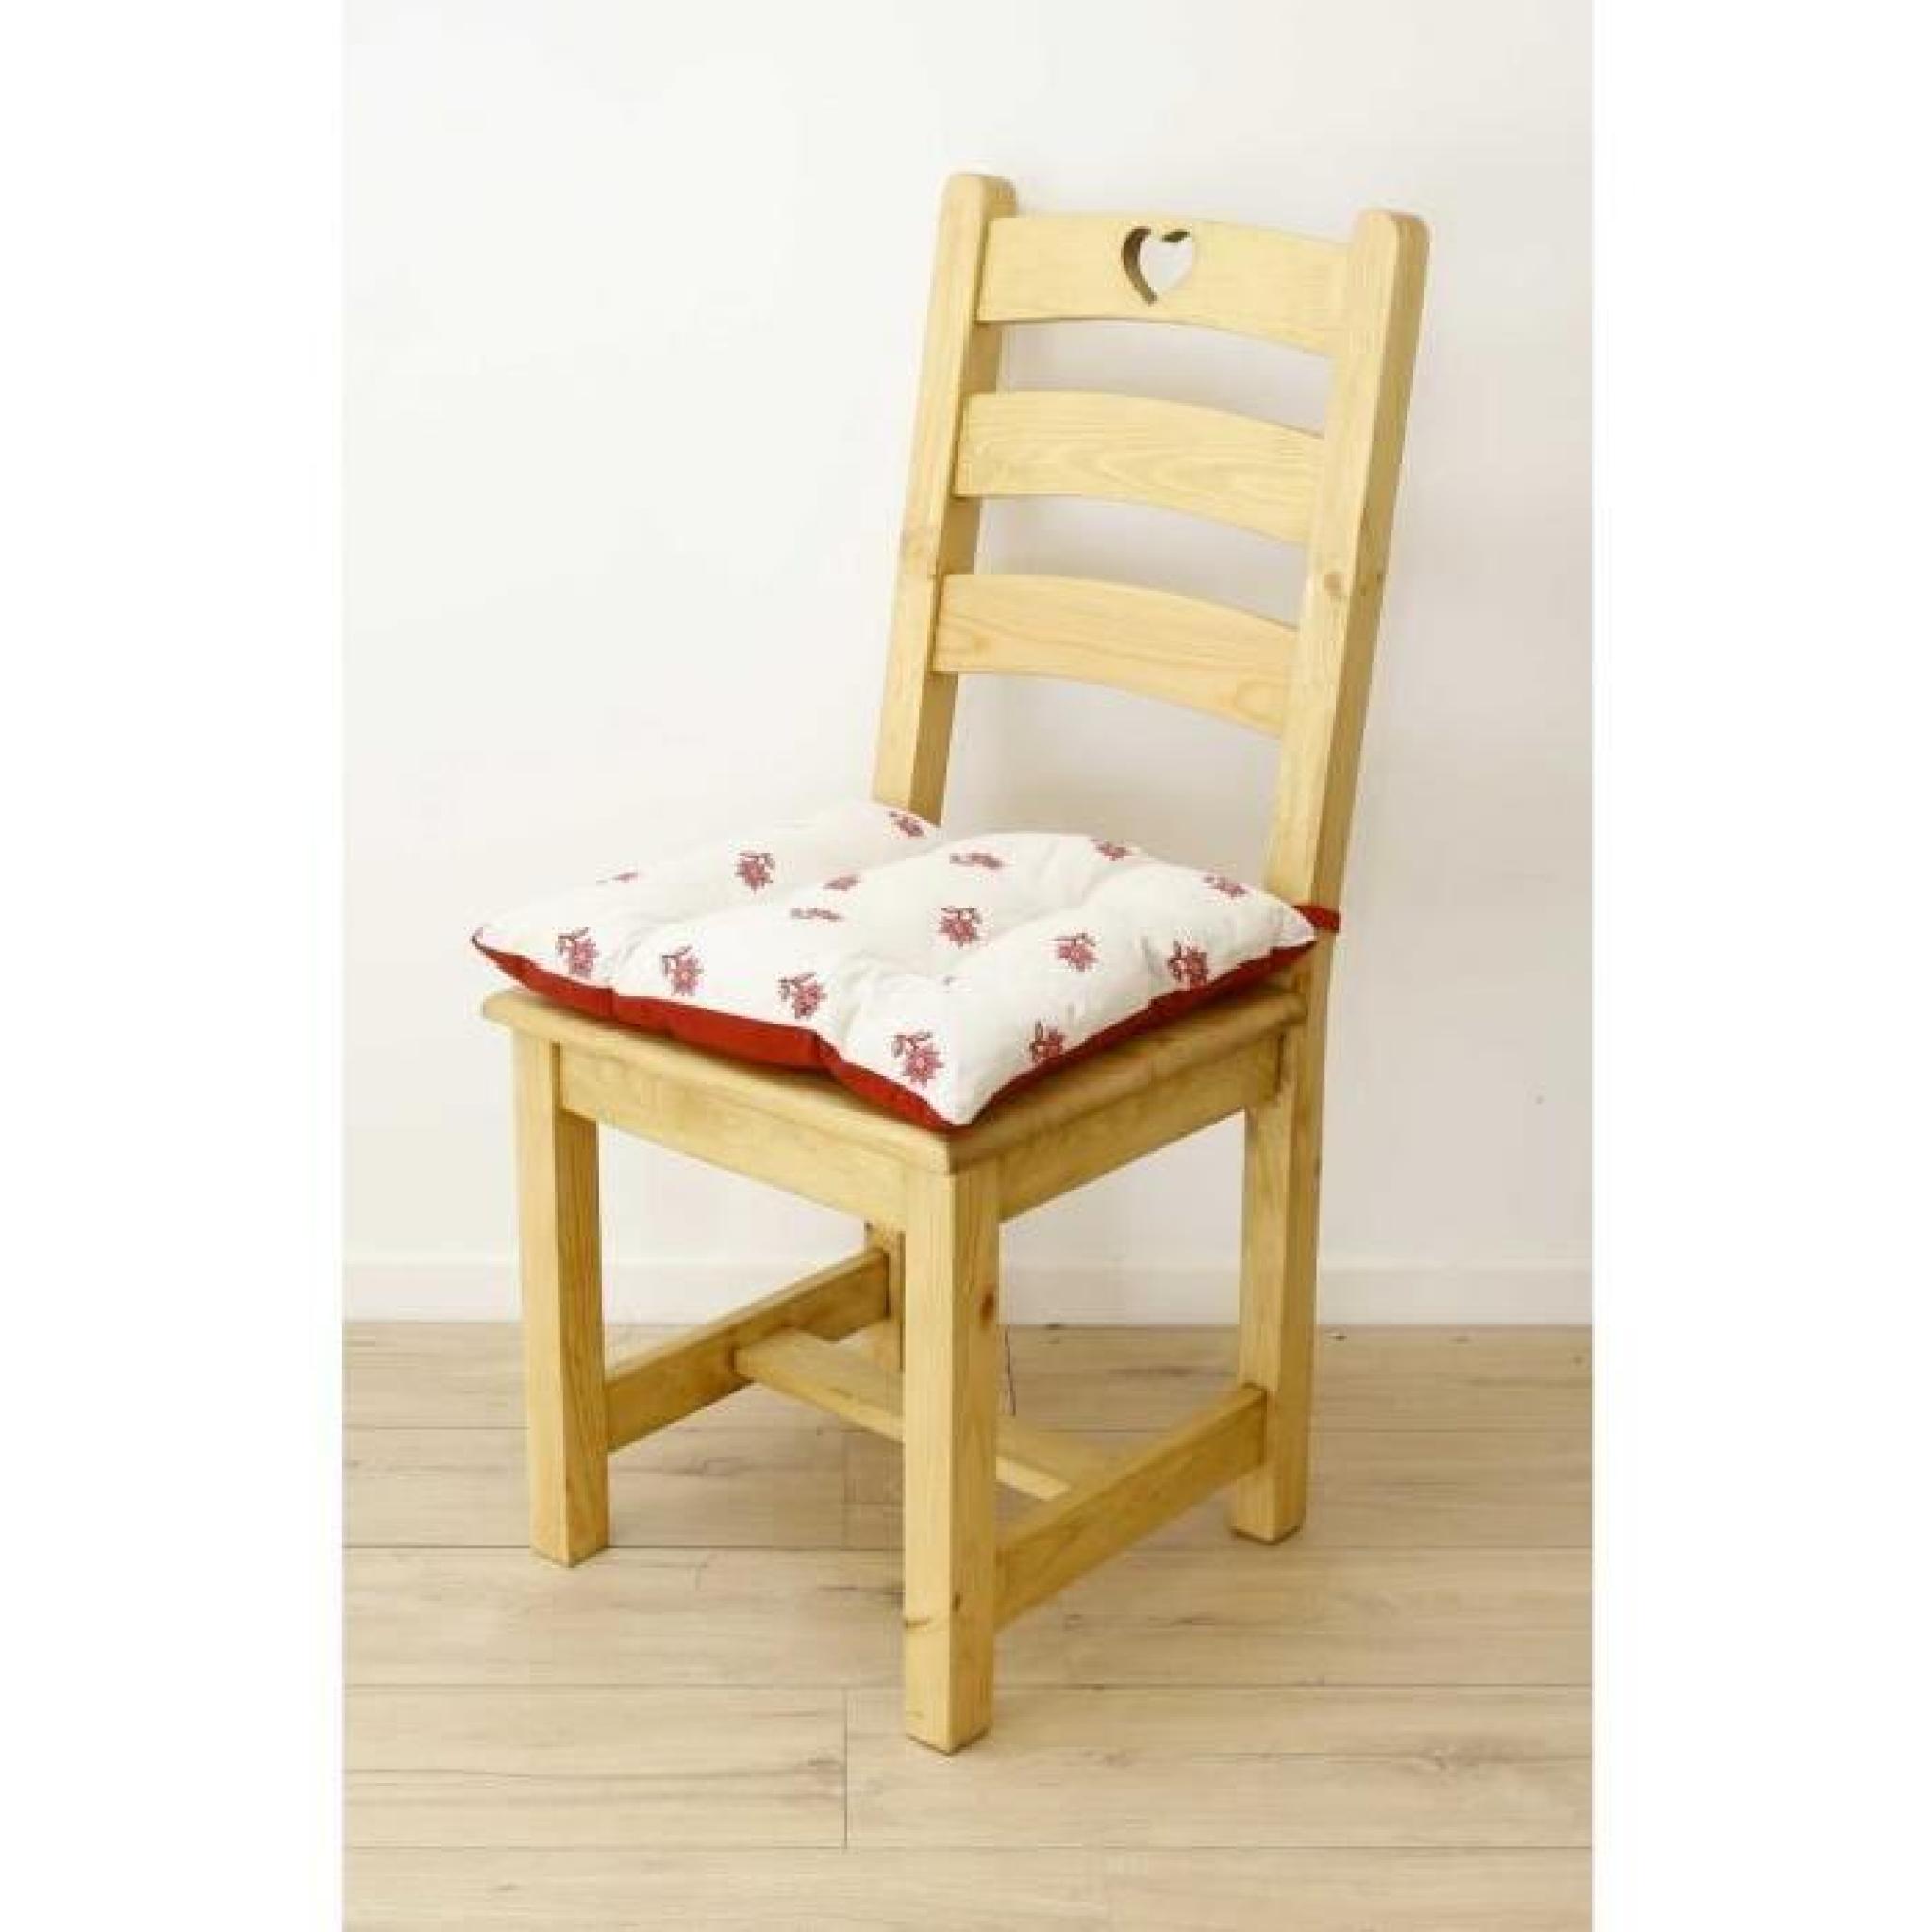 Galette de chaise style montagne Edelweiss blanc rouge Aspin pas cher